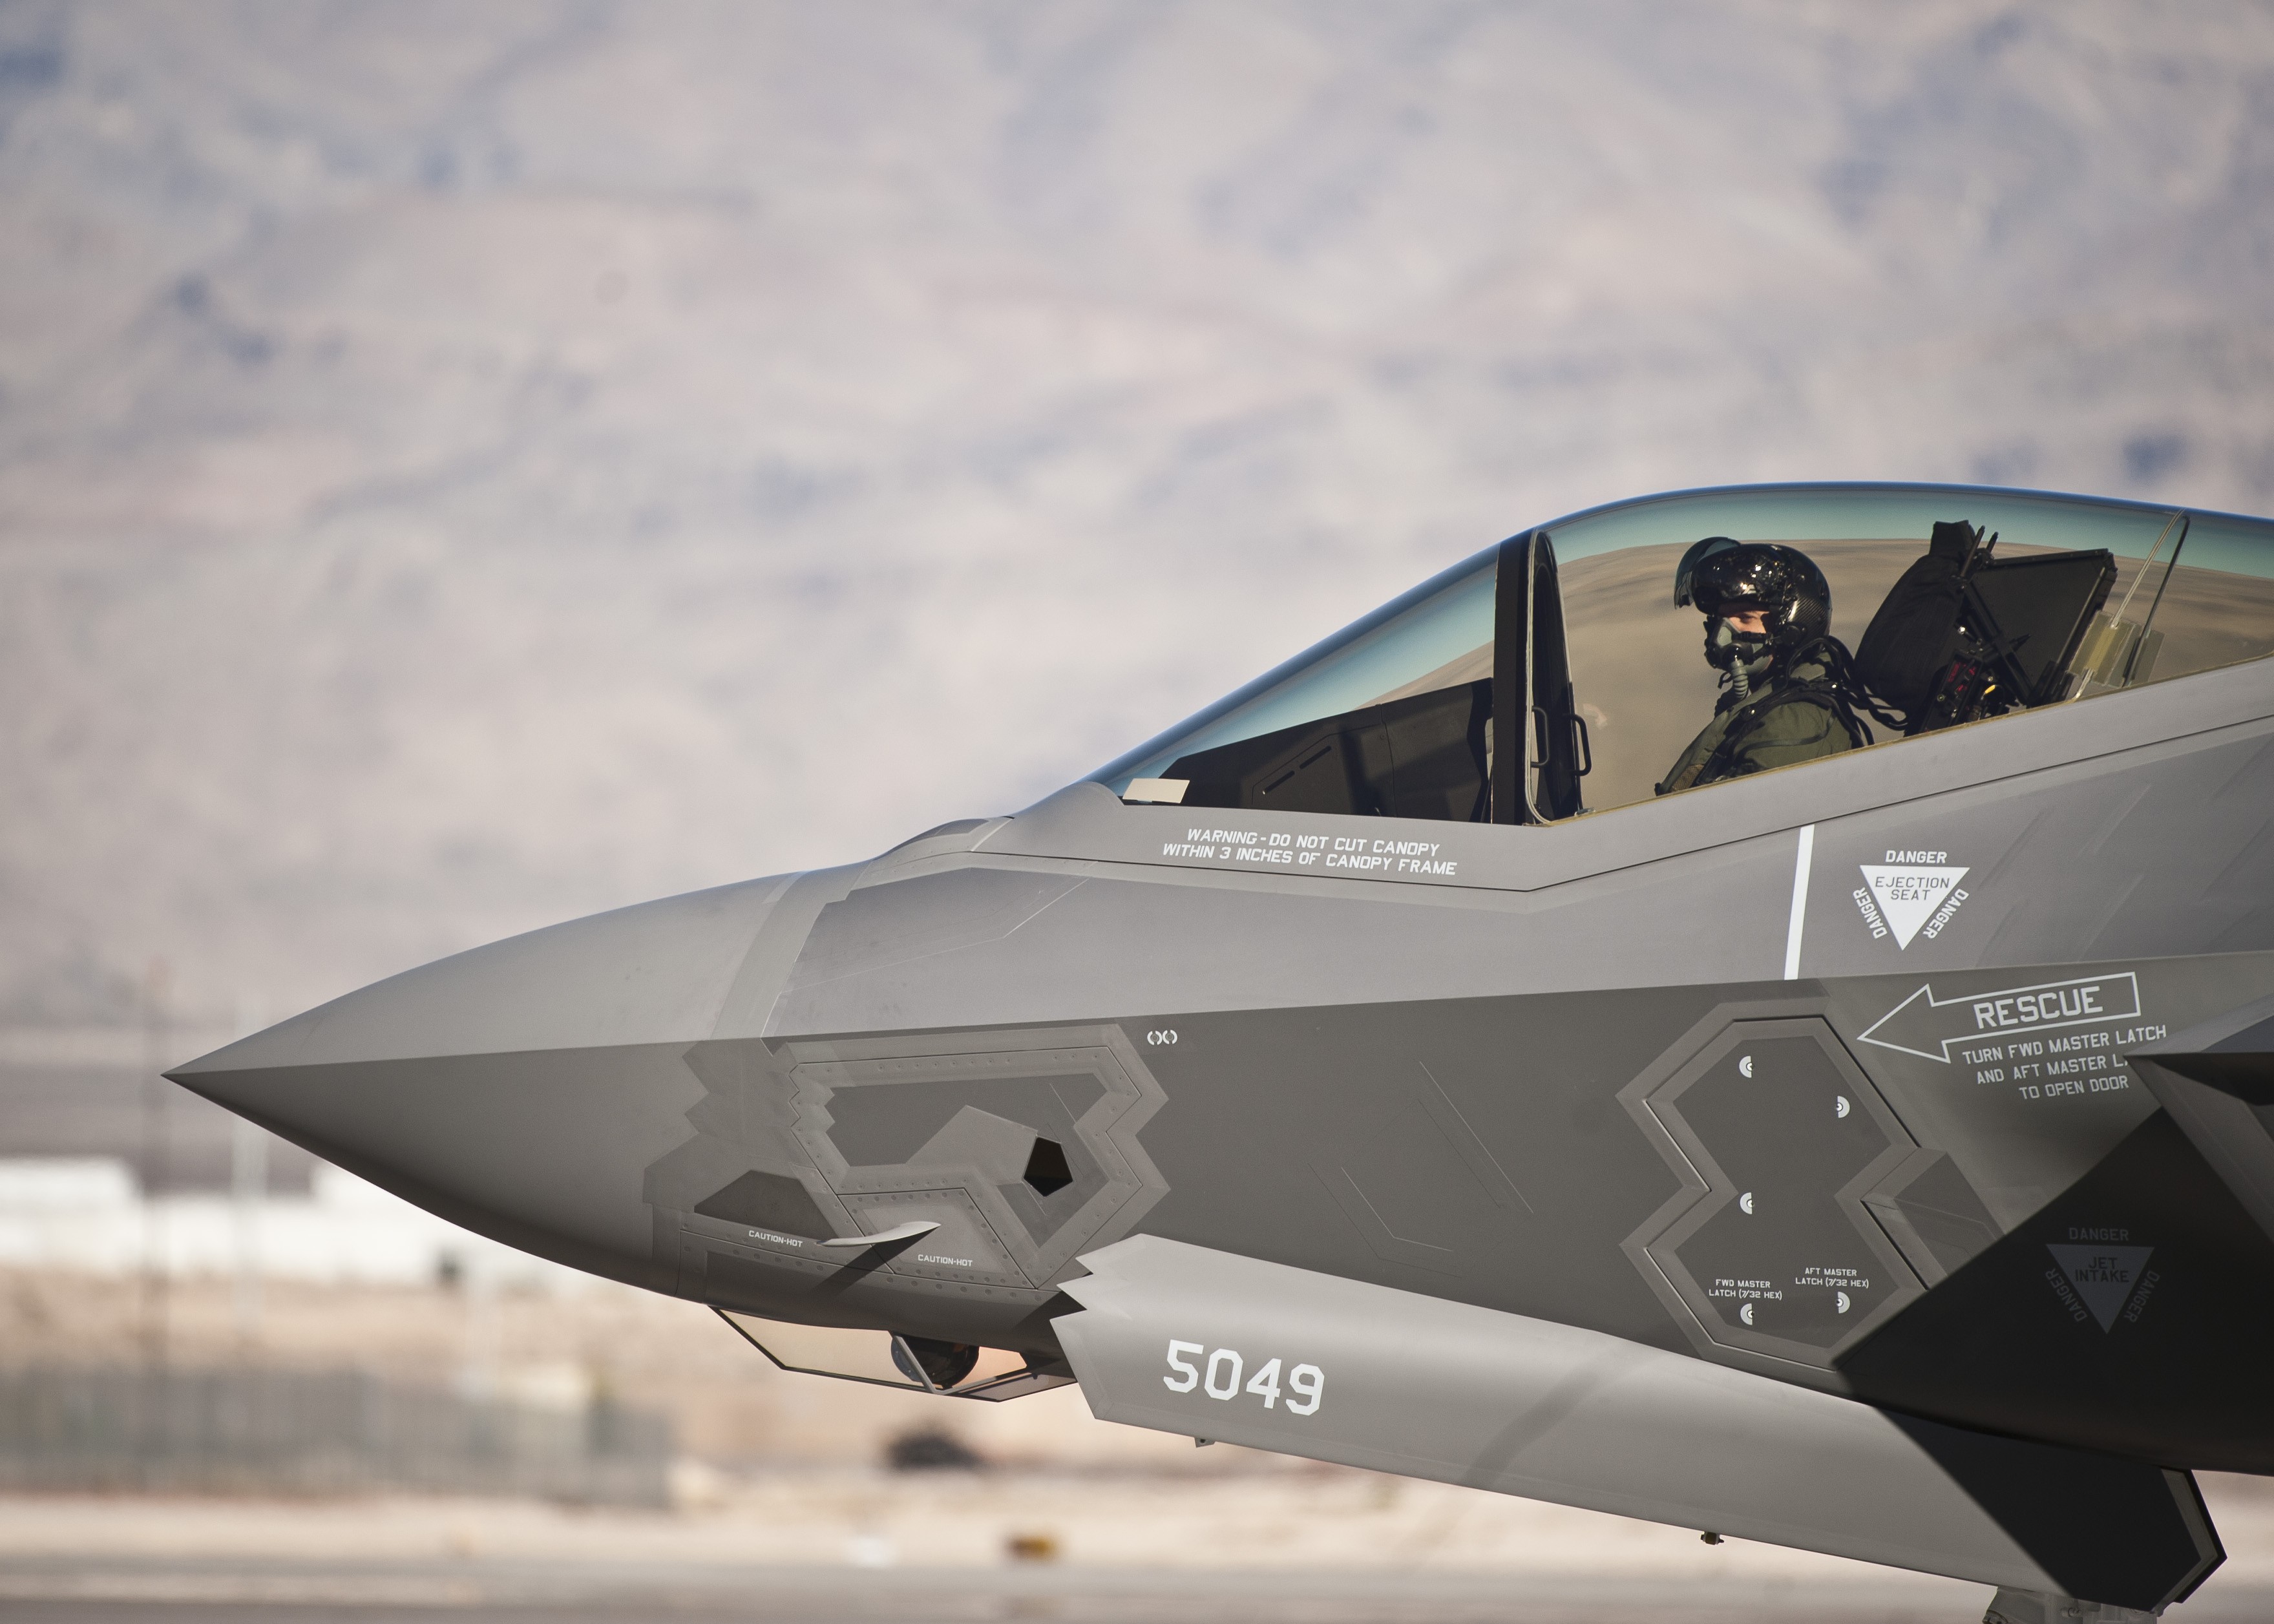 General 3519x2513 military military aircraft Lockheed Martin F-35 Lightning II military vehicle numbers vehicle American aircraft Lockheed Martin pilot US Air Force men side view